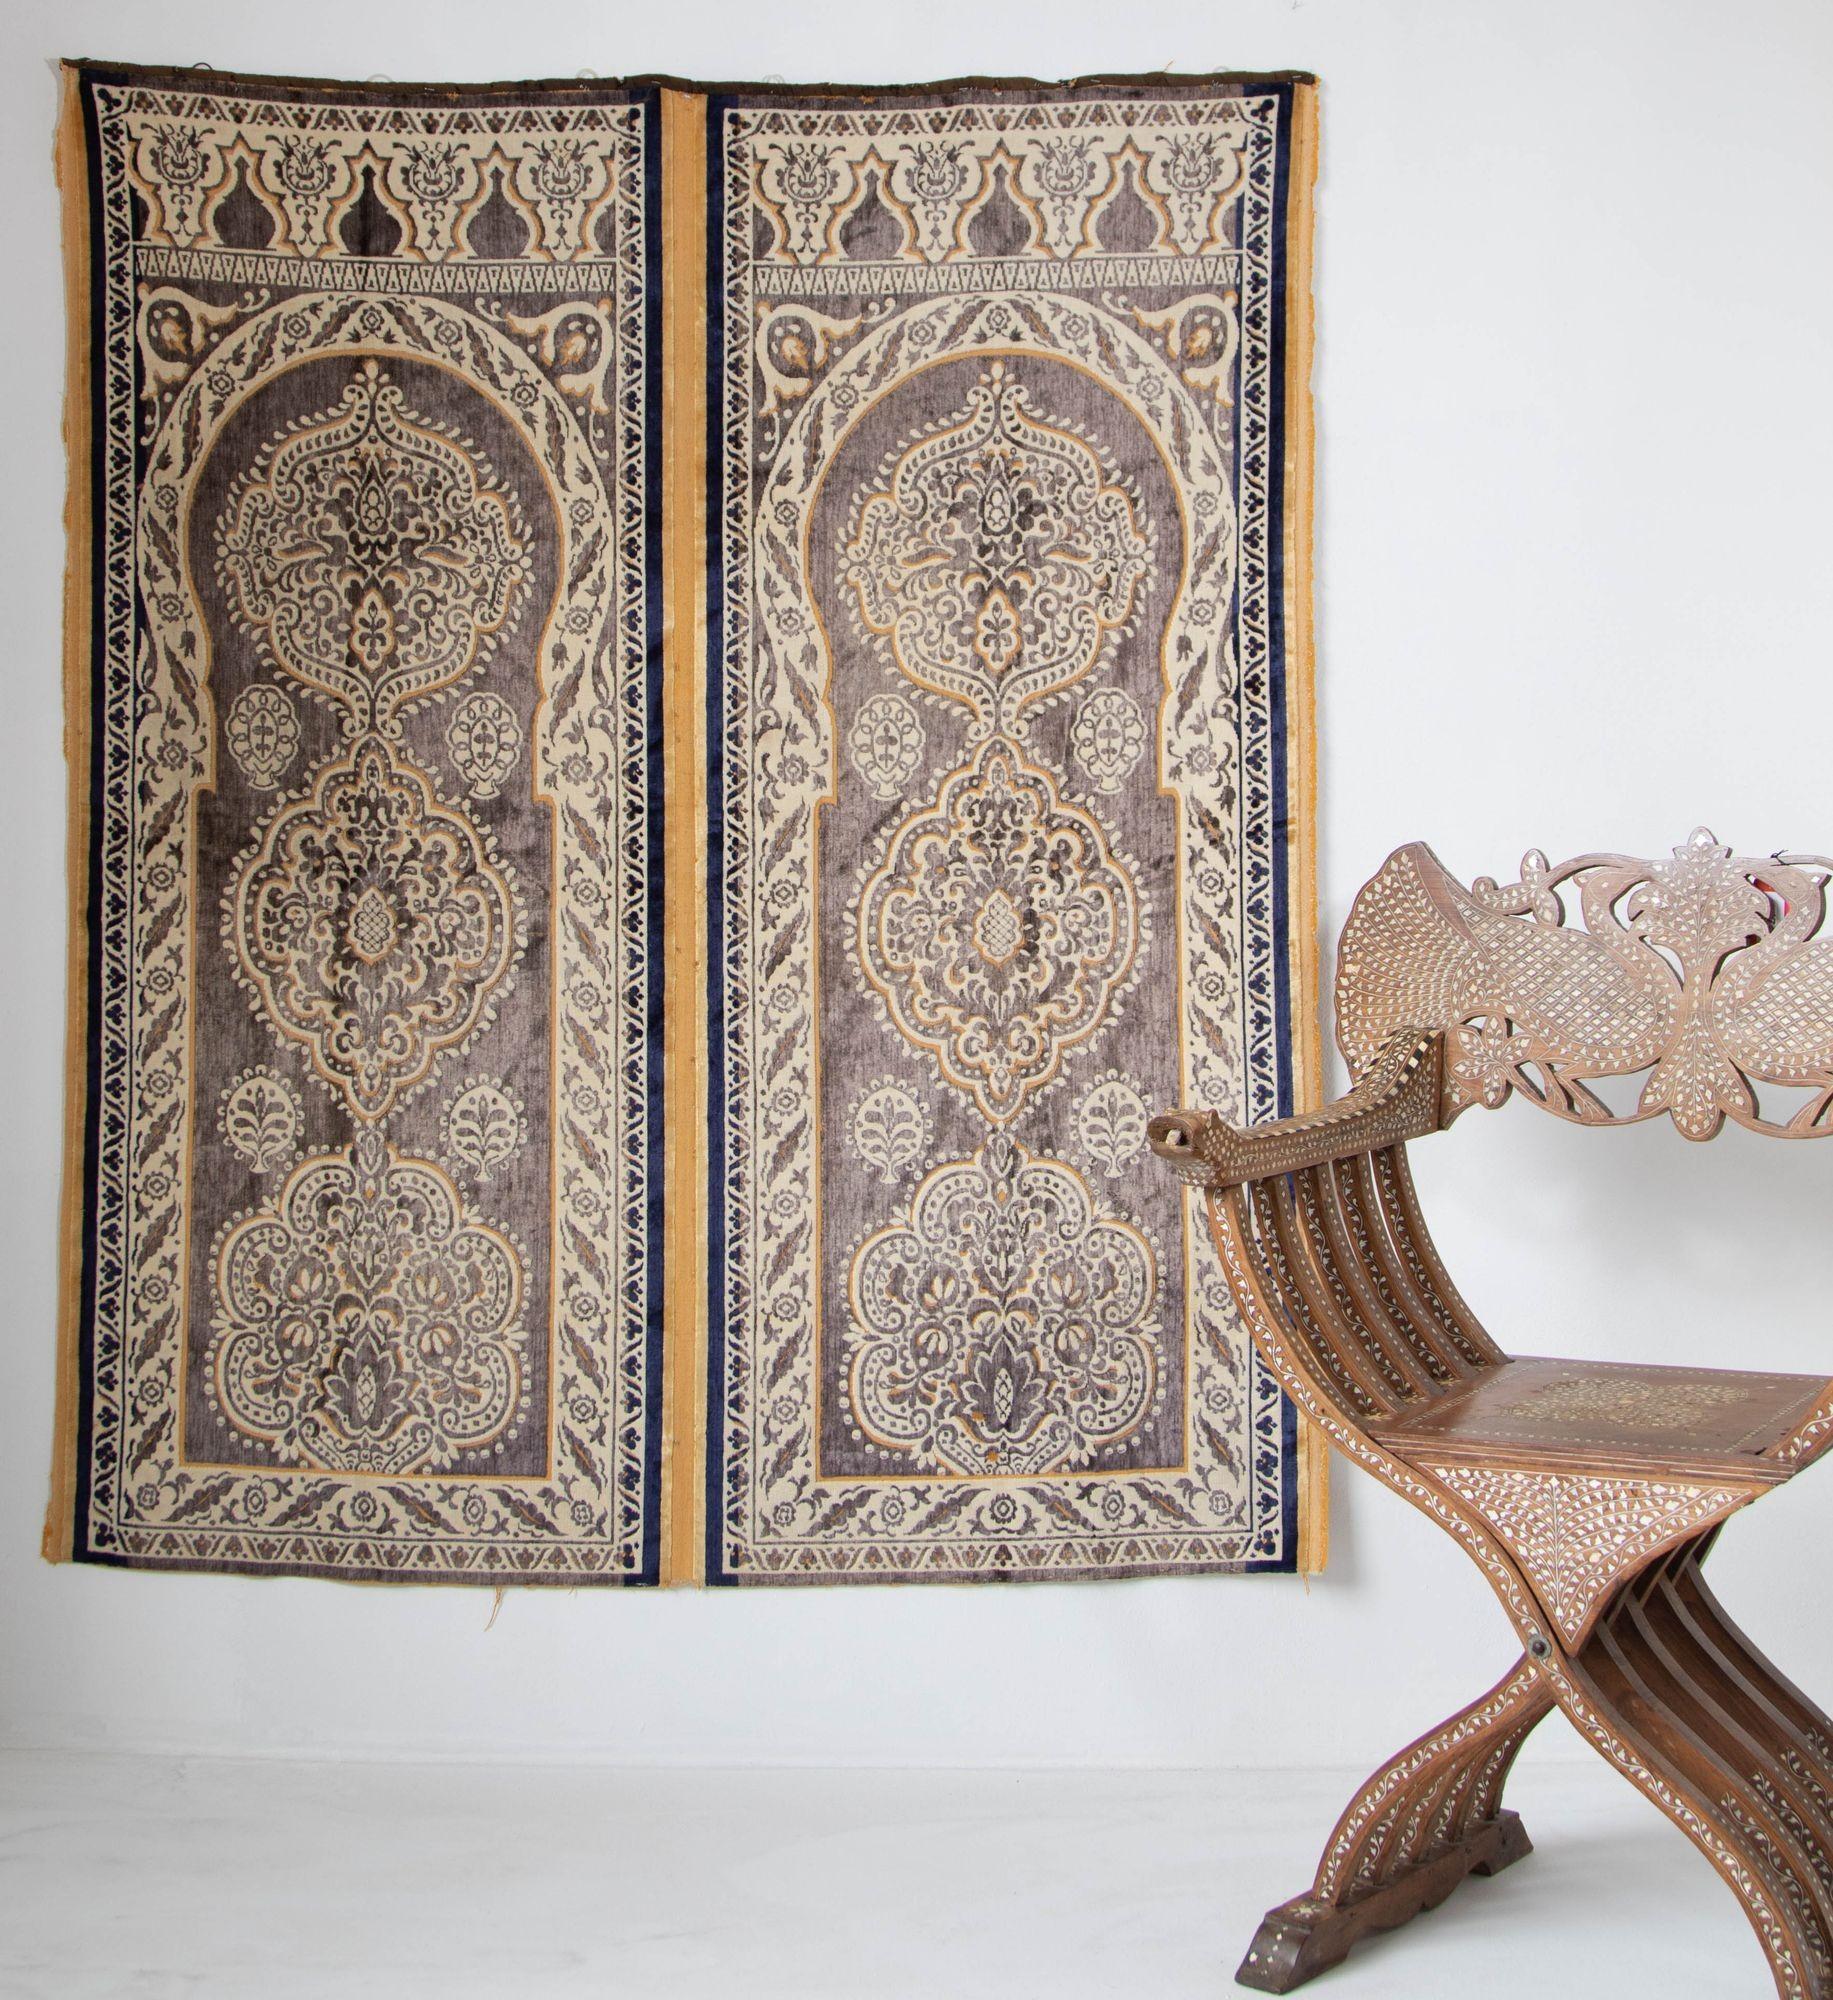 Antique Moroccan Moorish Silk Textile Tapestry Wall Hanging Hiti Ottoman voided silk velvet wall covering.
Silk velvet cut designs, light browns, yellow, cream and blue, the panel consist of two Moorish arches with Islamic floral designs.
Antique